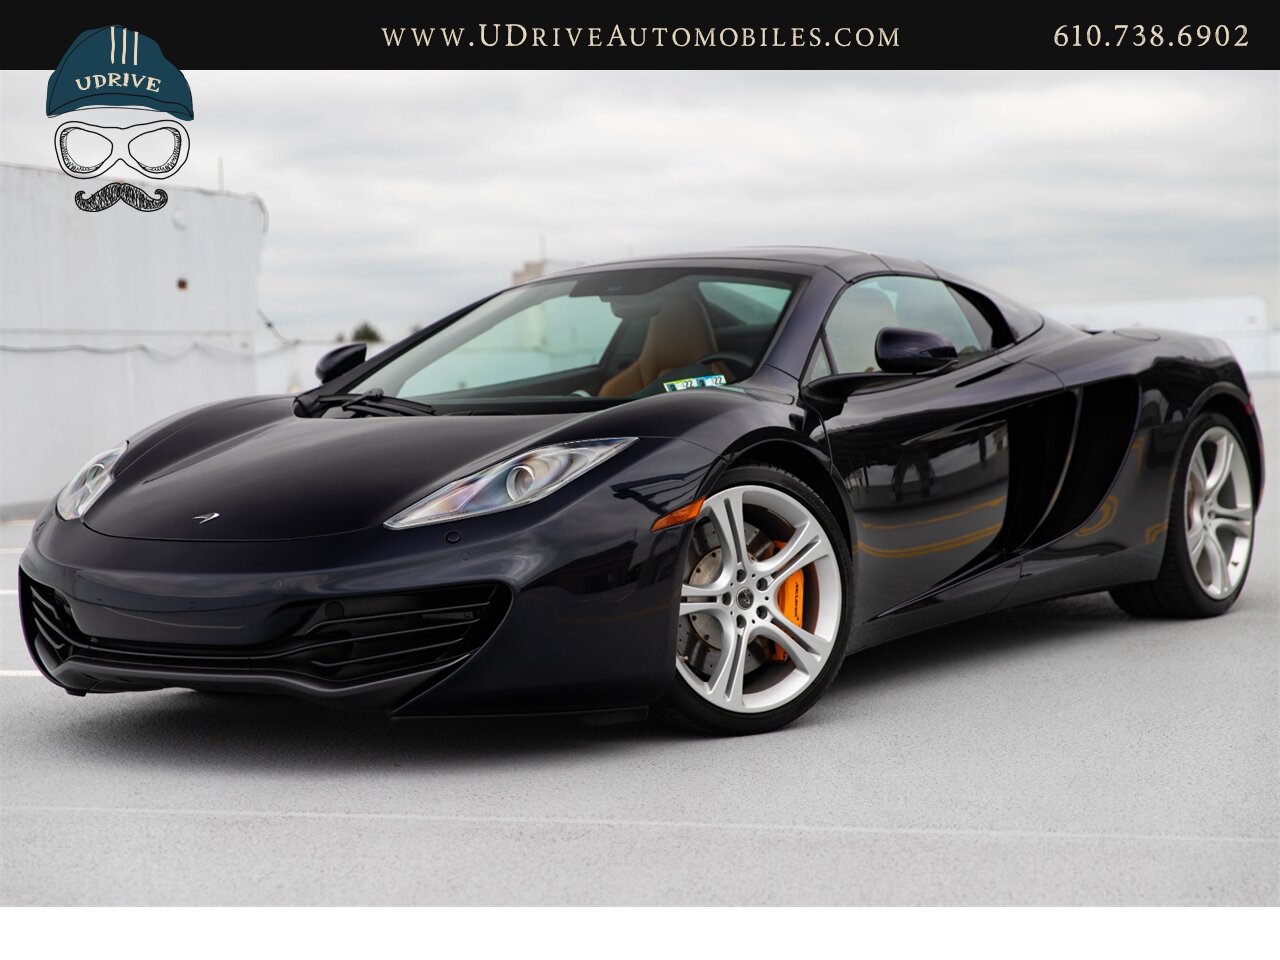 2013 McLaren MP4-12C Spider 1 Owner 6k Miles Carbon Fiber Full Leather  Sapphire Black over Natural Tan Leather - Photo 1 - West Chester, PA 19382